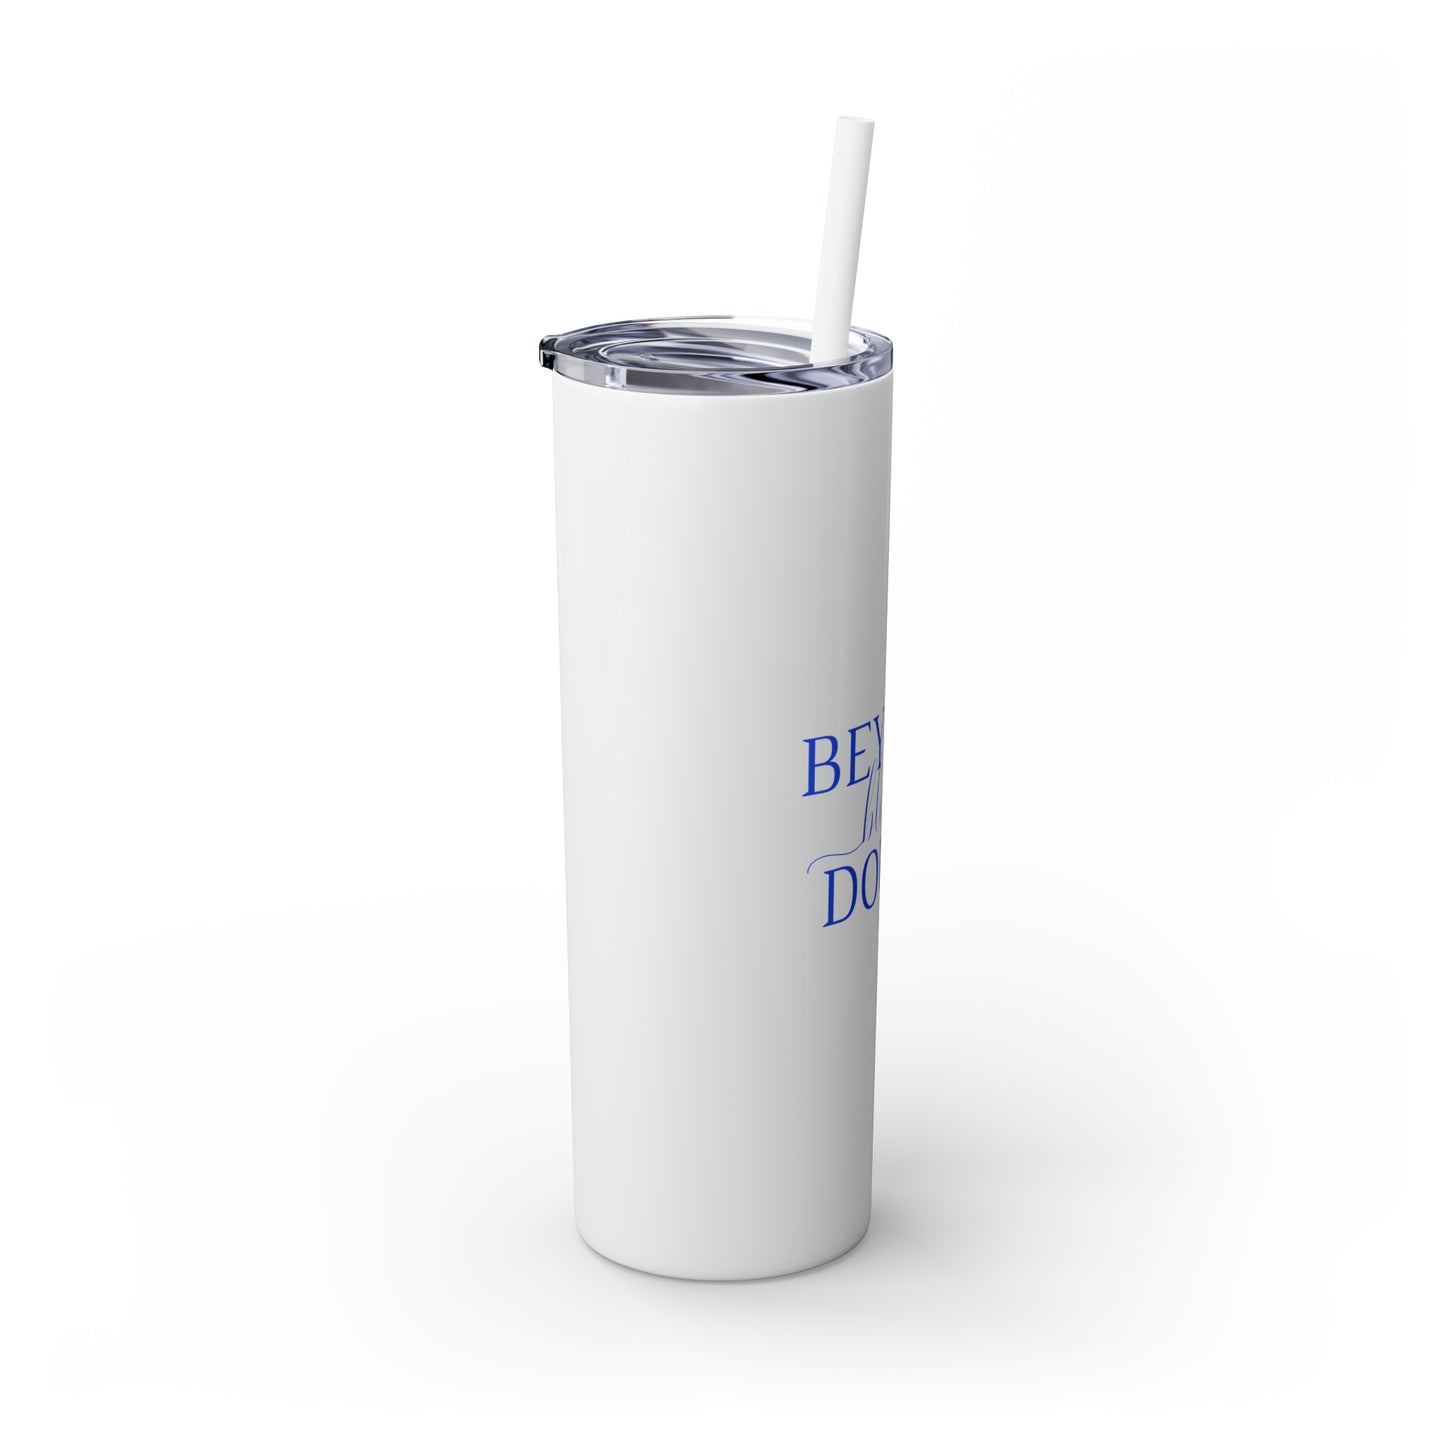 Beyond Blessed Doula - Plain Skinny Tumbler with Straw, 20oz - Royal Blue